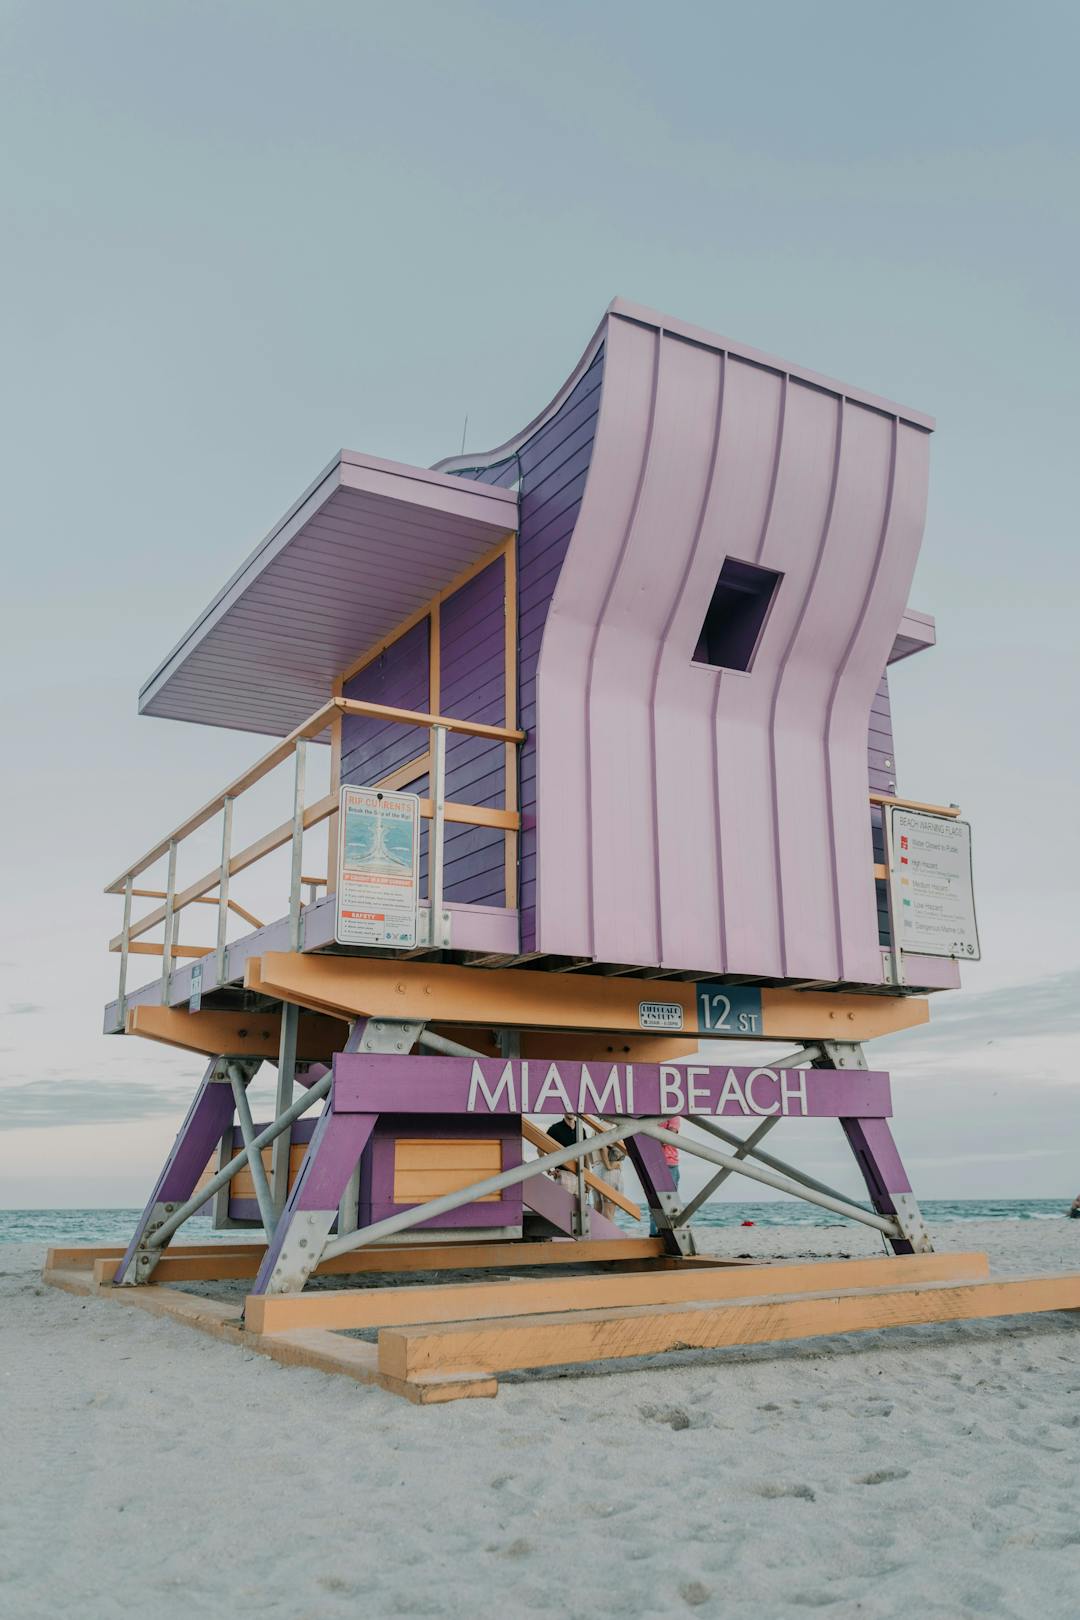 A pink and purple lifeguard tower on a beach